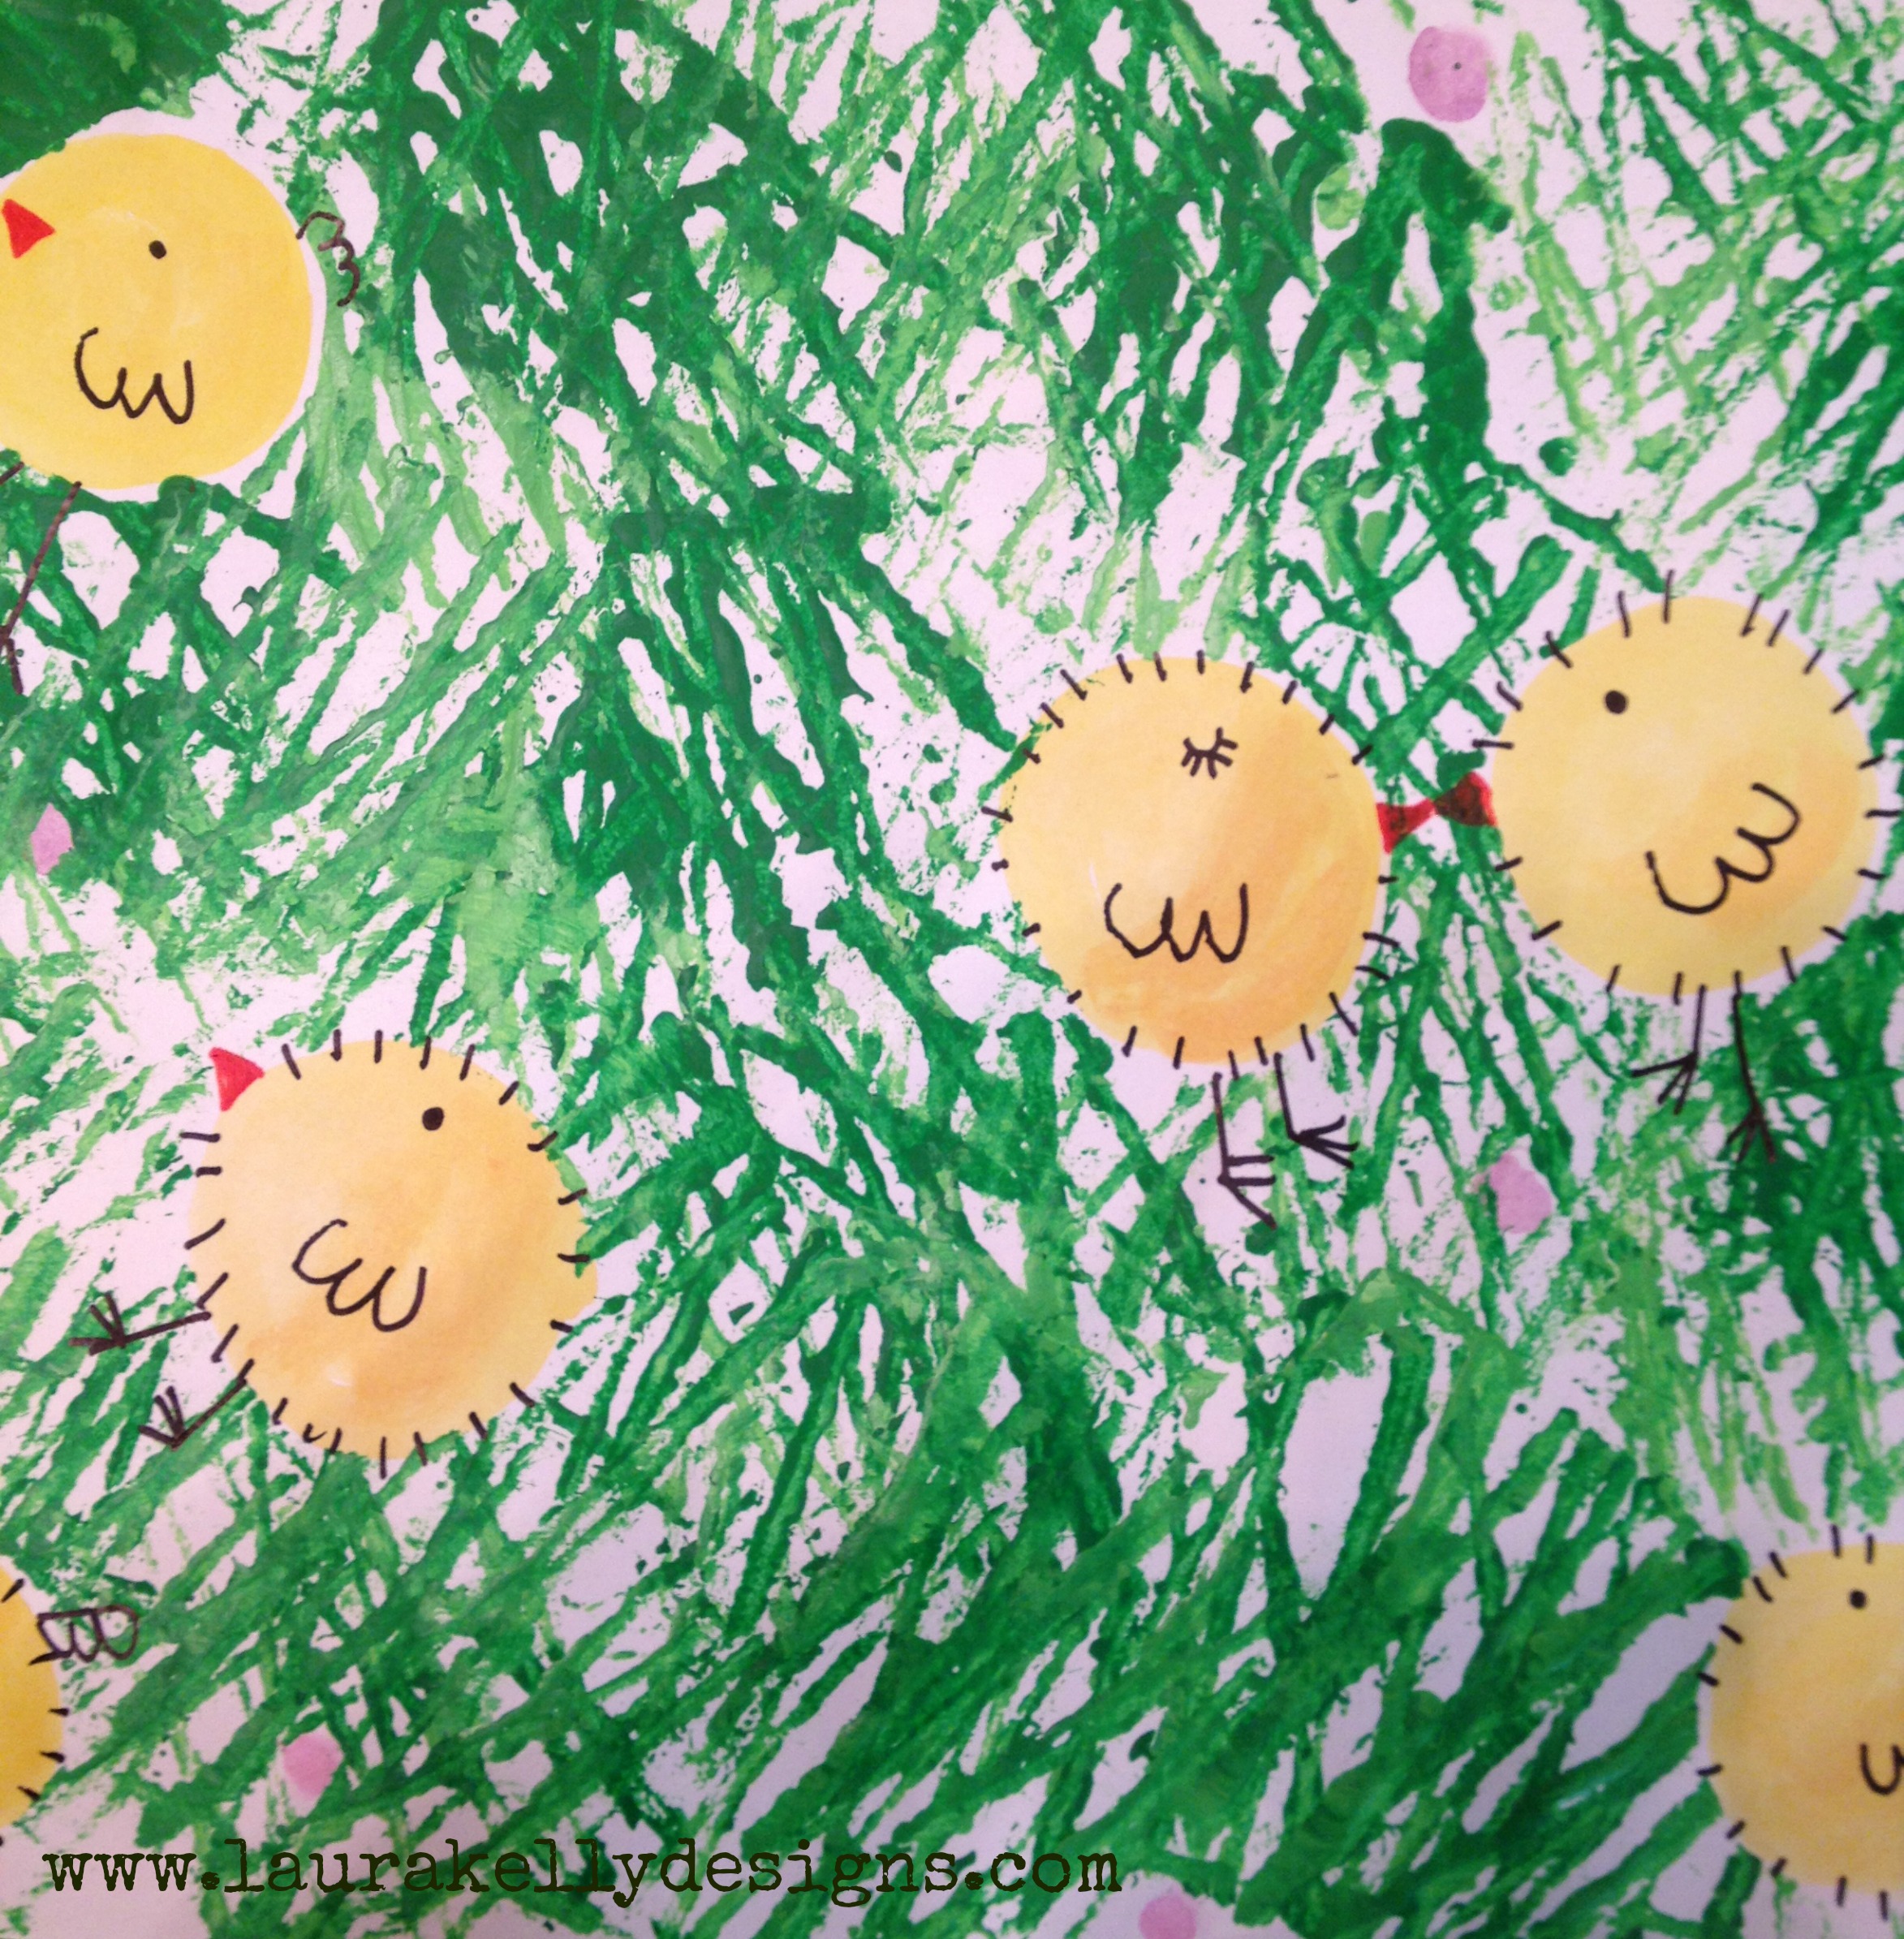 Chicks in the Grass Painting | Fun Family Crafts2346 x 2389